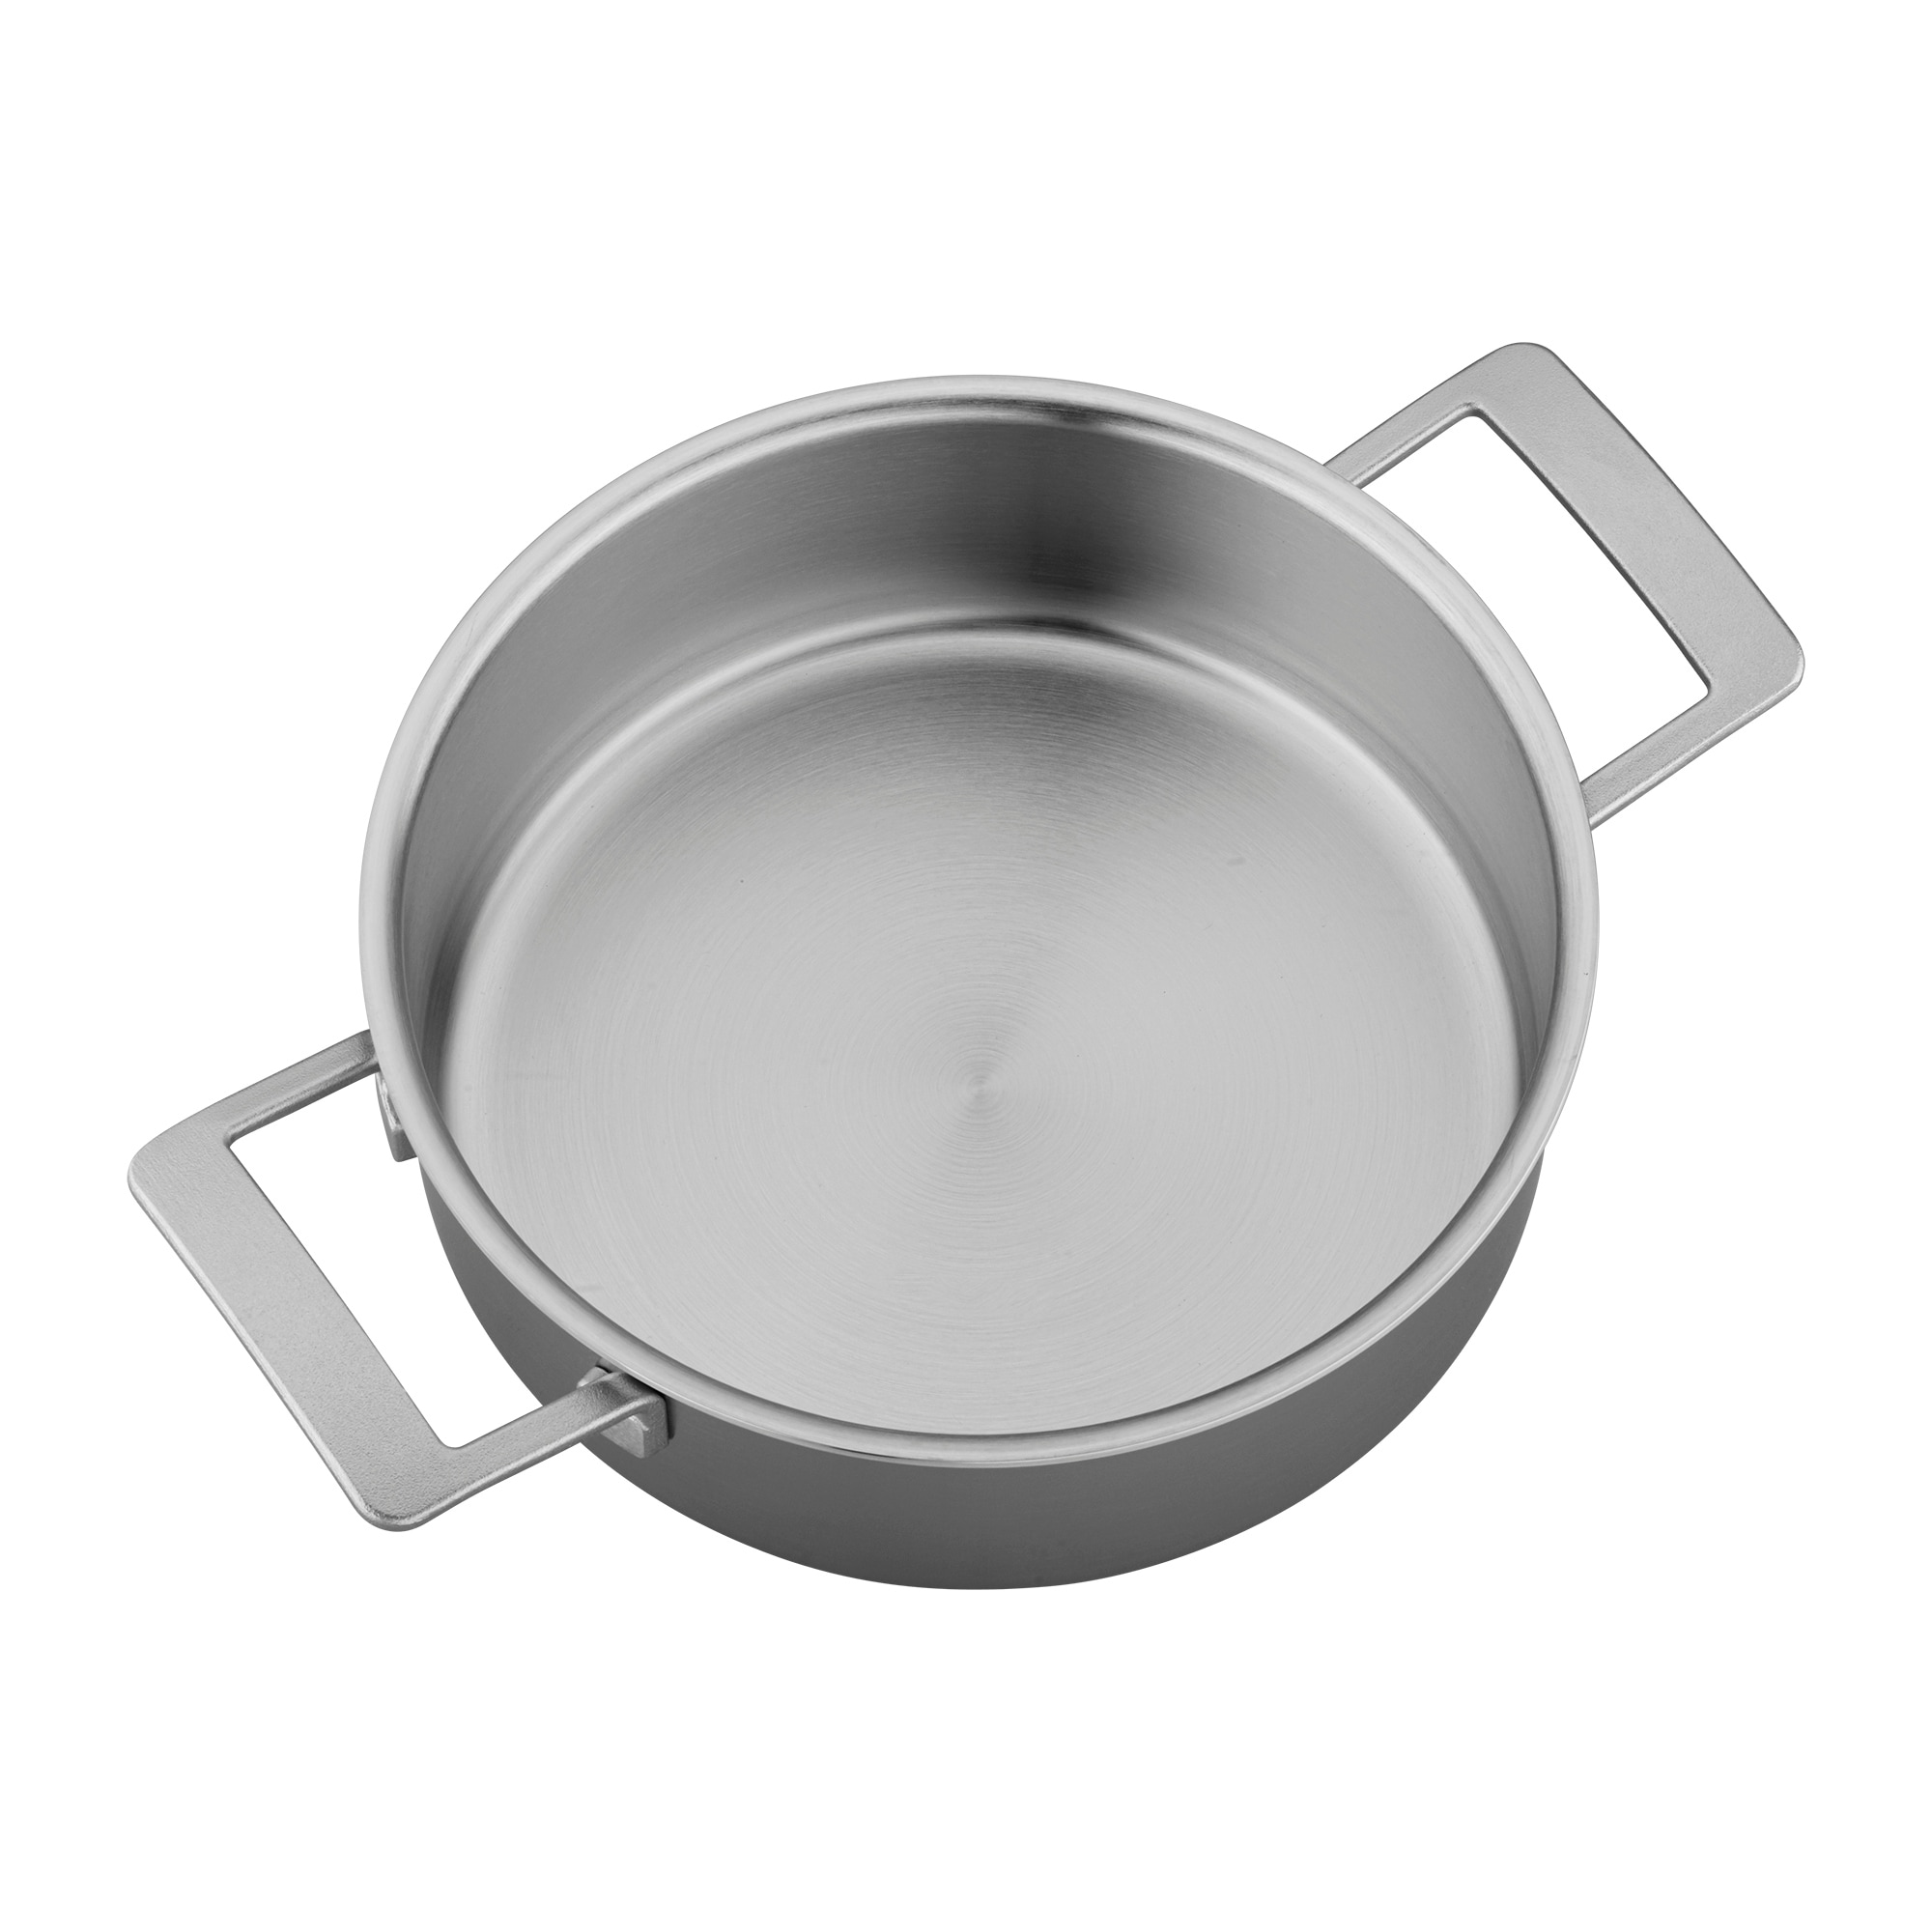 https://ak1.ostkcdn.com/images/products/is/images/direct/f01cb8f9ff2ad716c750b8048f99c87290adfac5/Demeyere-Industry-5-Ply-4-qt-Stainless-Steel-Deep-Saute-Pan.jpg